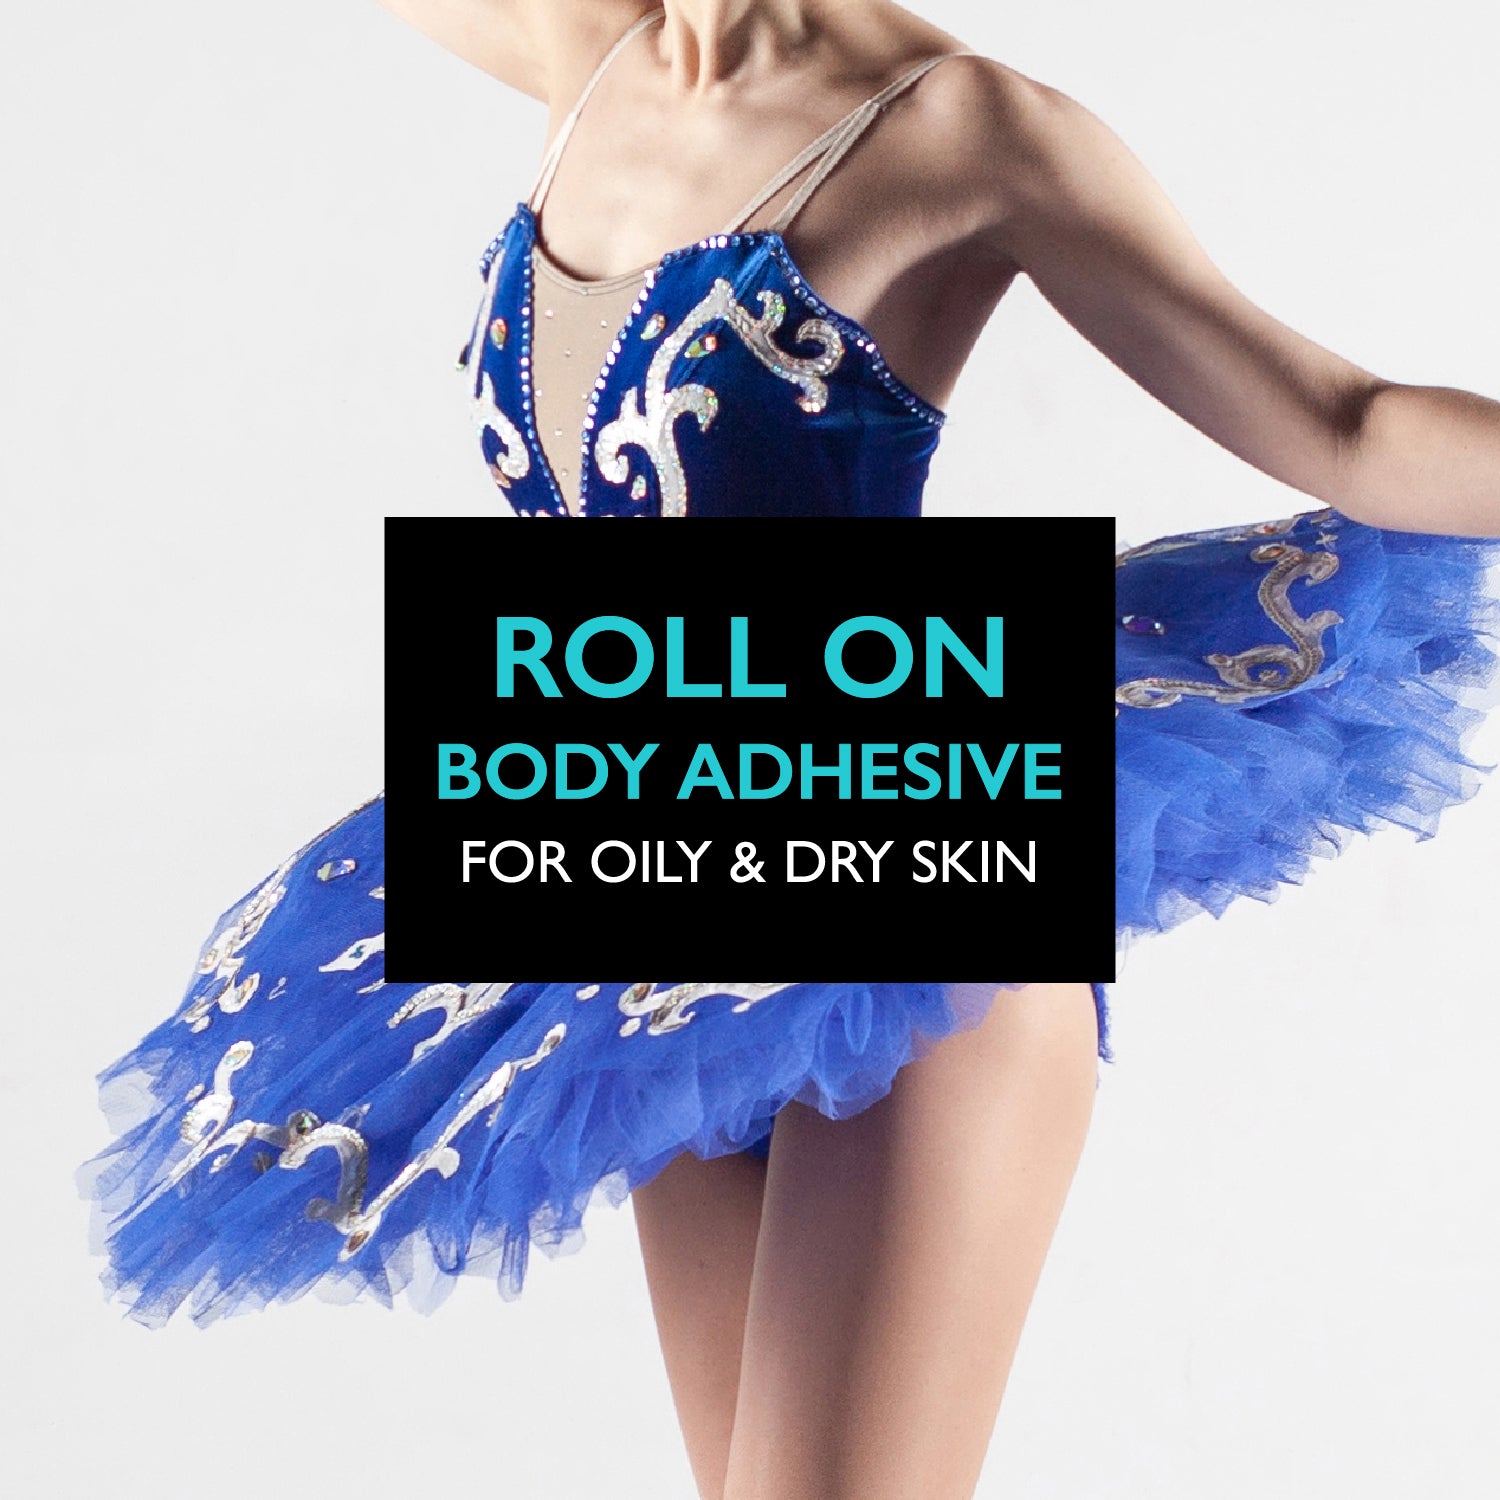 Hold Up Sweat Proof Body Adhesive - Accessories, Hold Up HOLDUP